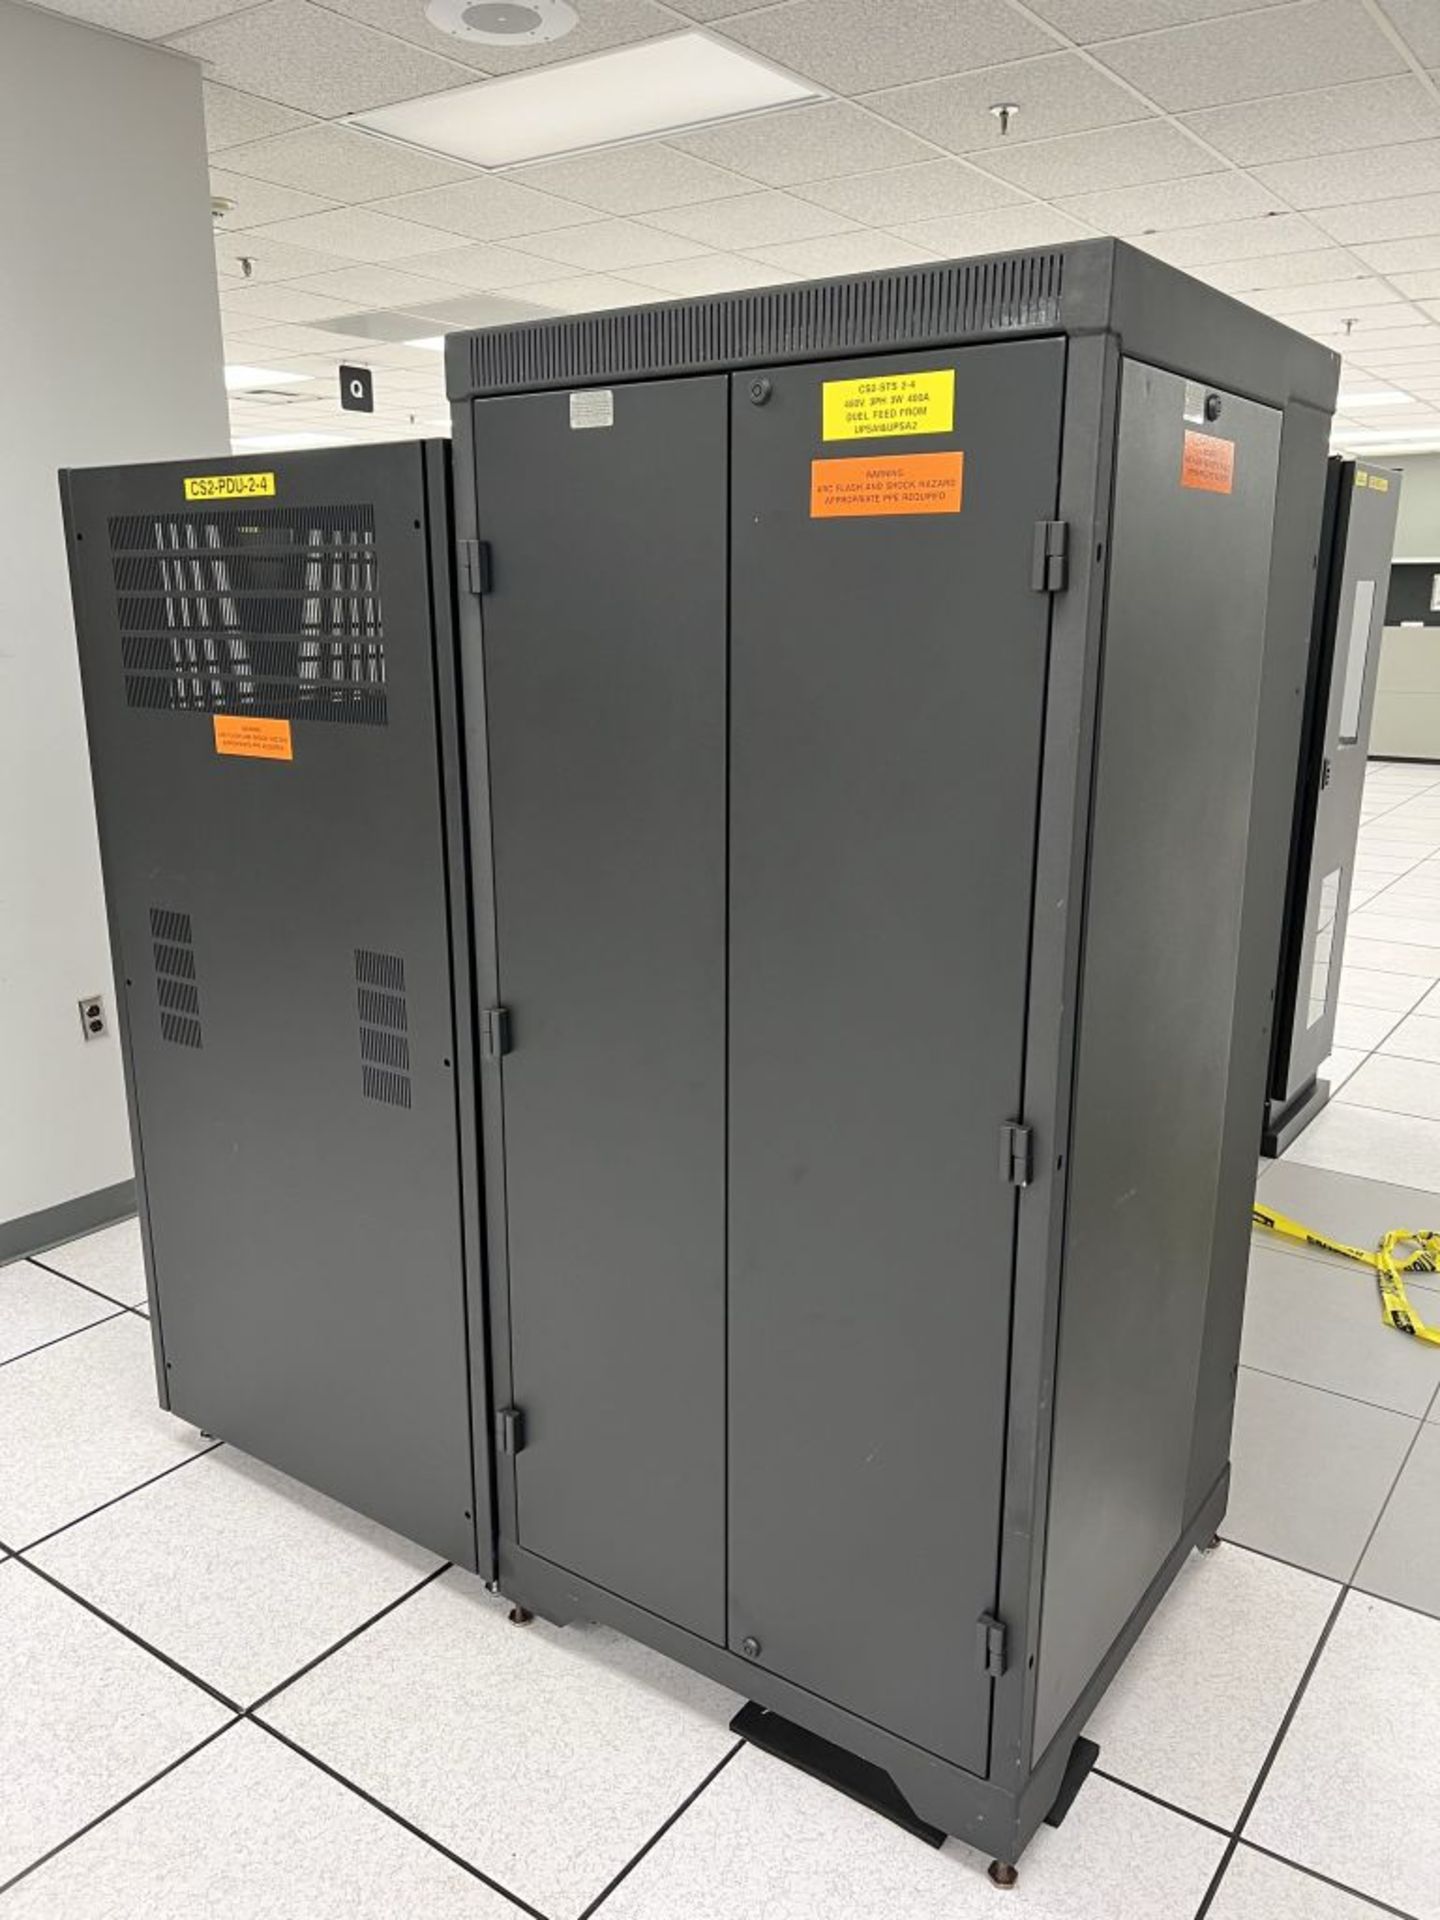 Spartanburg, SC - Cyberex Digital Static Transfer Switch with United Power Power Distribution Module - Image 2 of 2